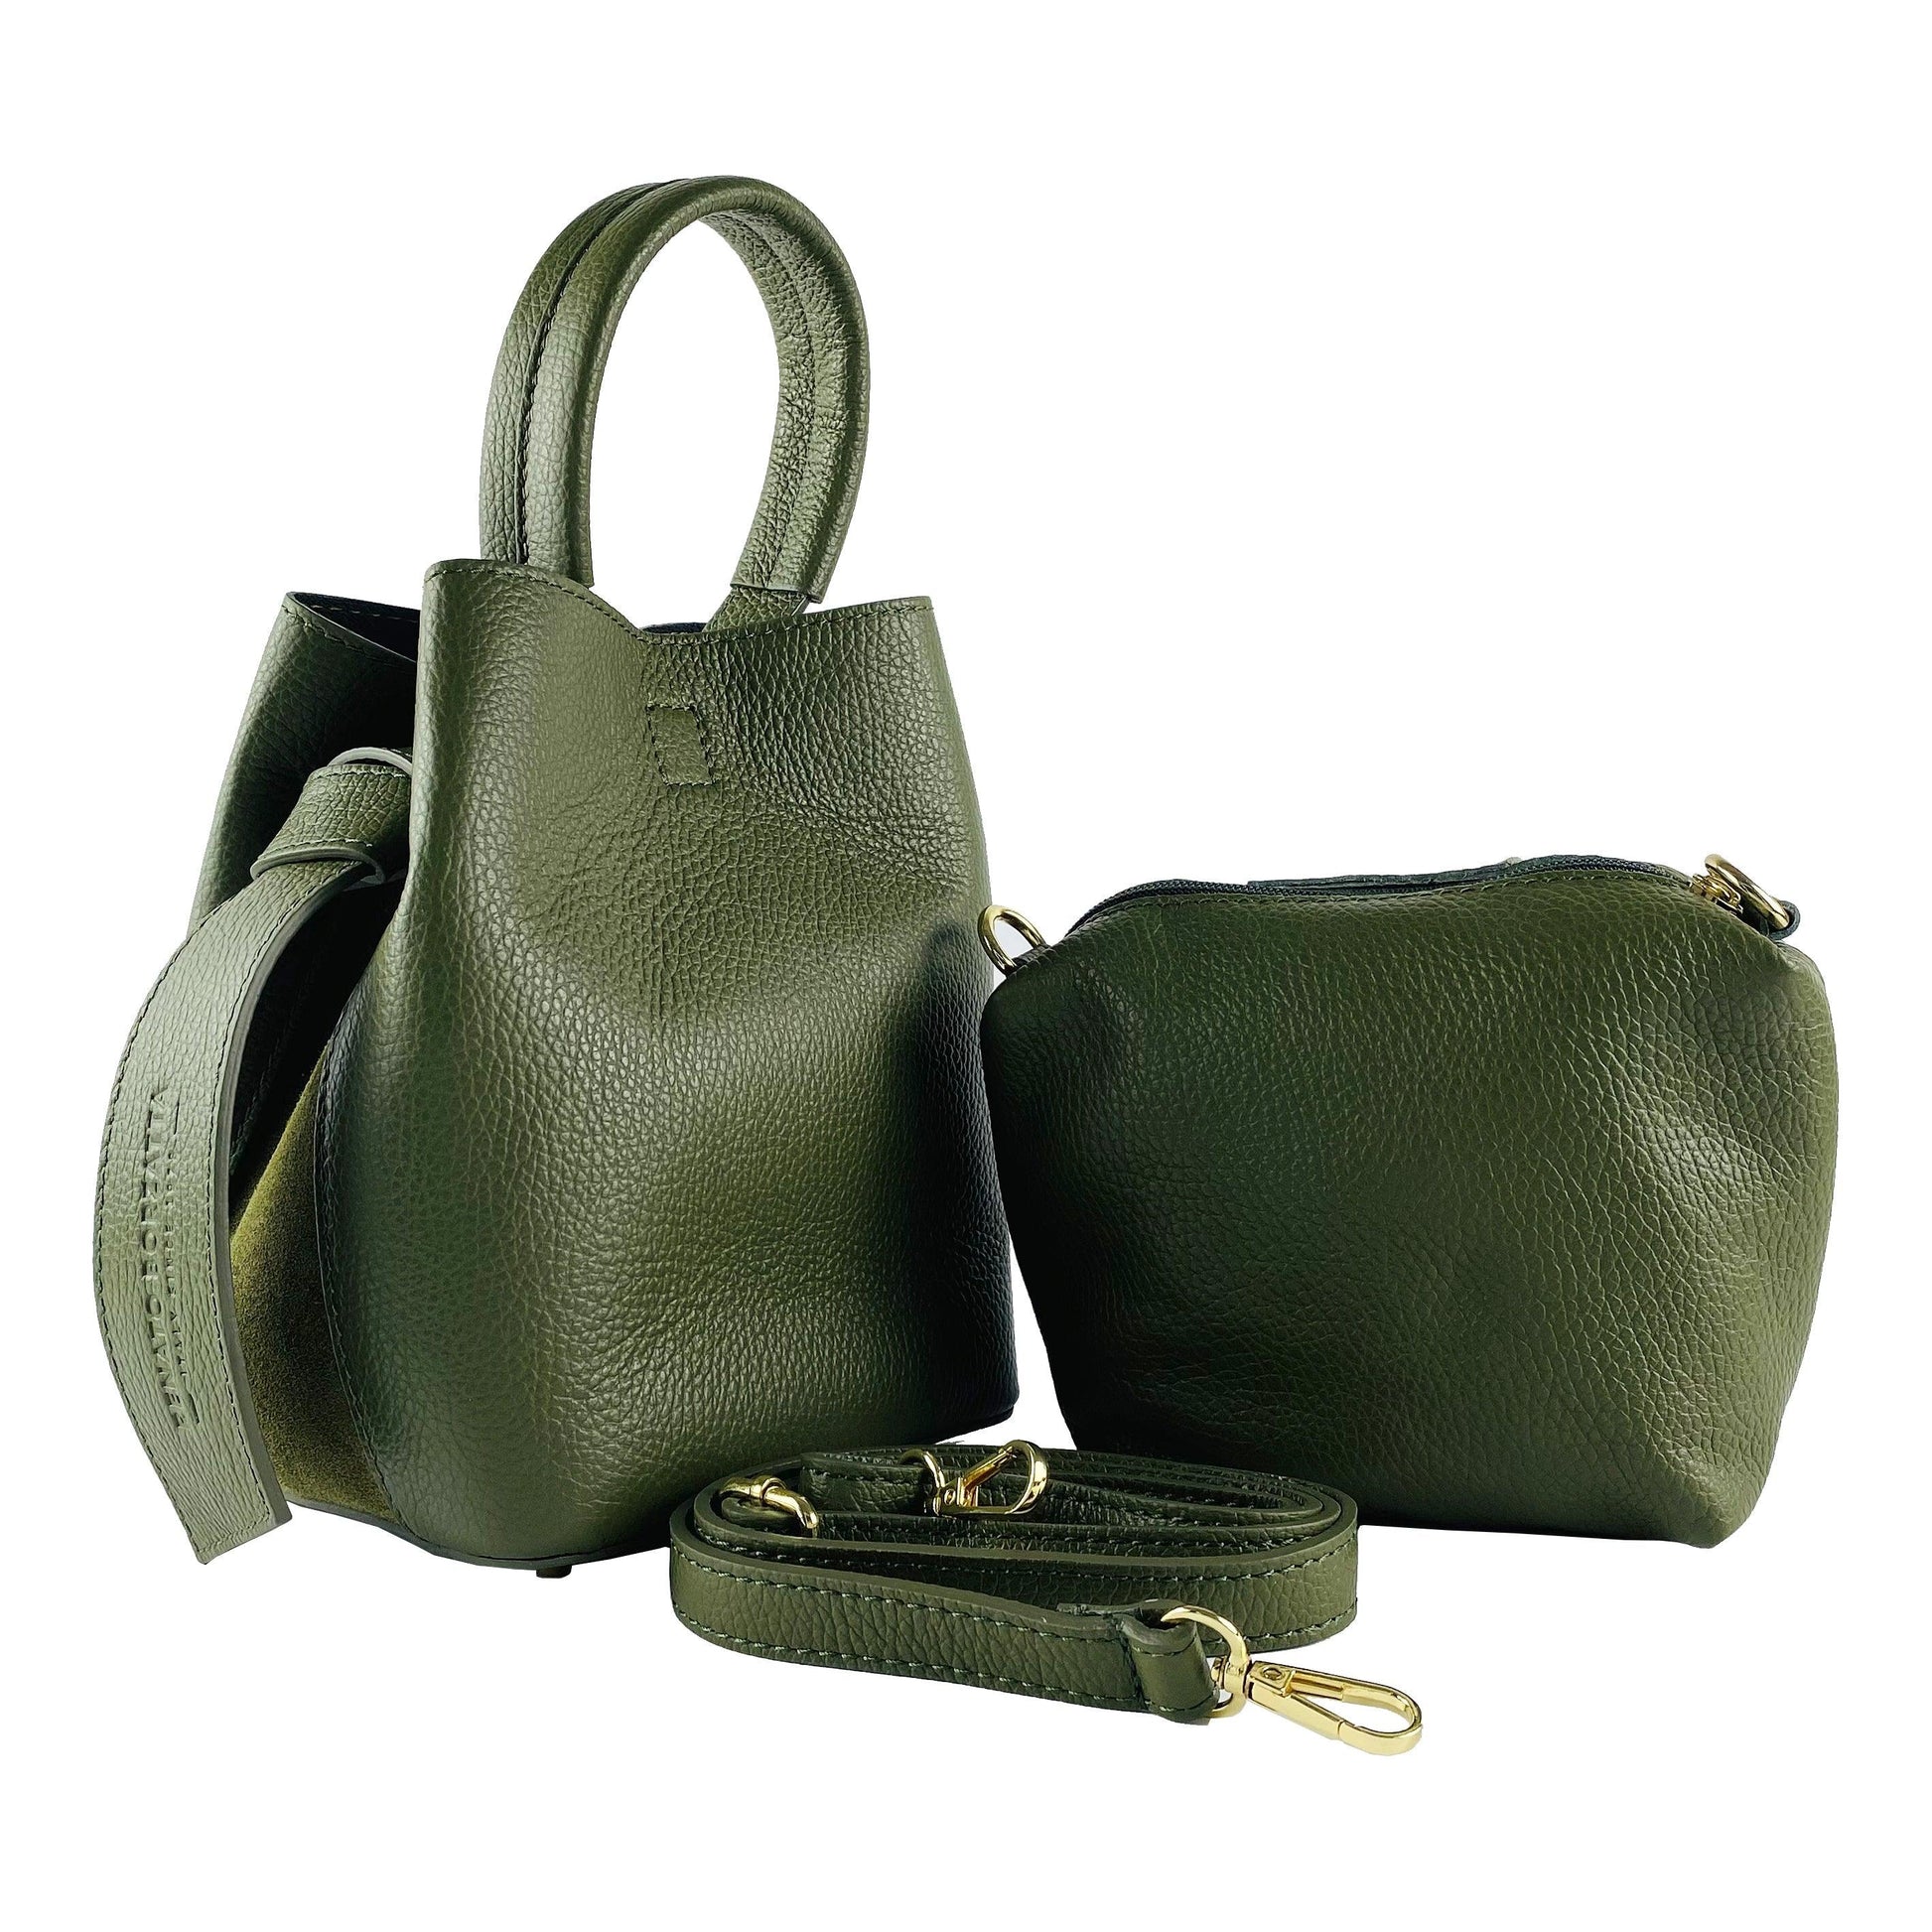 RB1006E | Women's Bucket Bag with Shoulder Bag in Genuine Leather | 16 x 14 x 21 cm-0